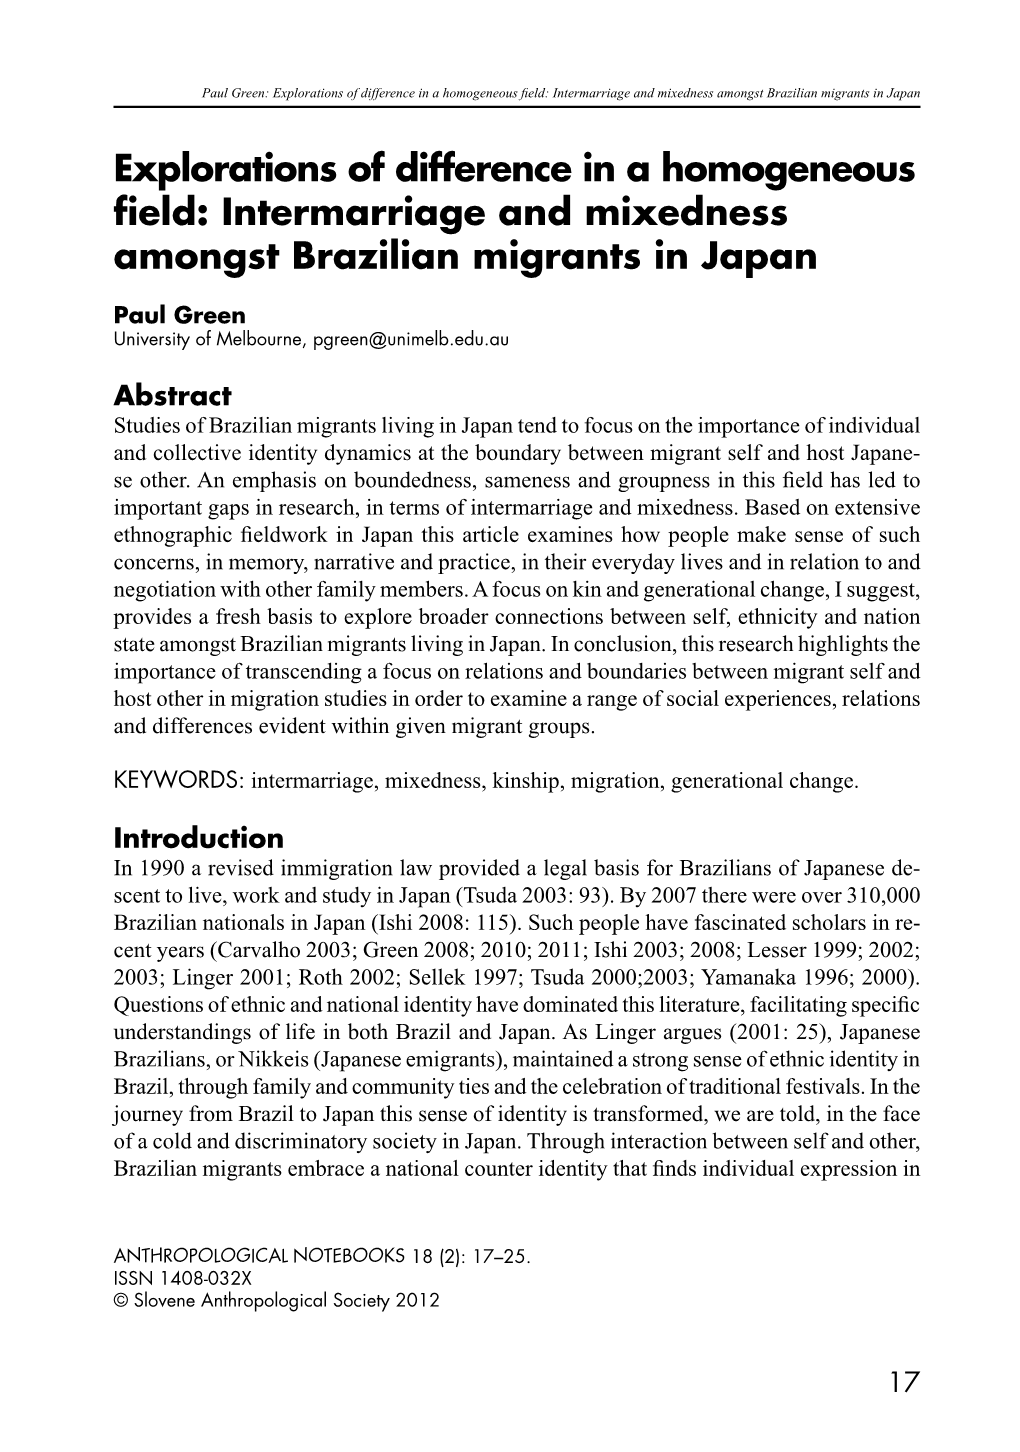 Intermarriage and Mixedness Amongst Brazilian Migrants in Japan